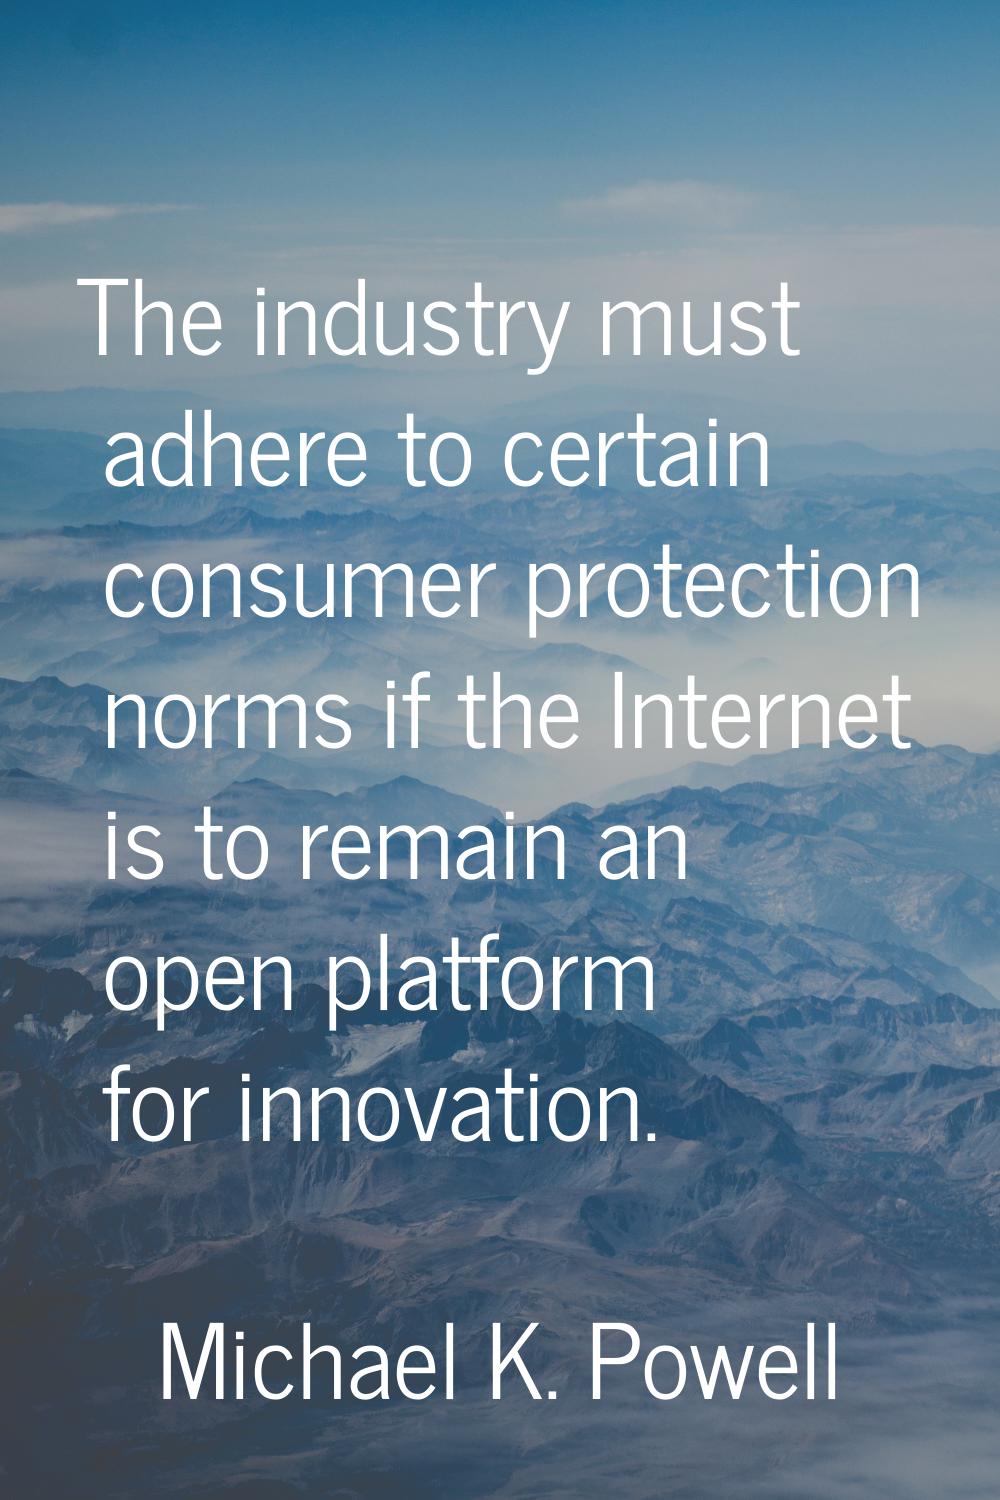 The industry must adhere to certain consumer protection norms if the Internet is to remain an open 